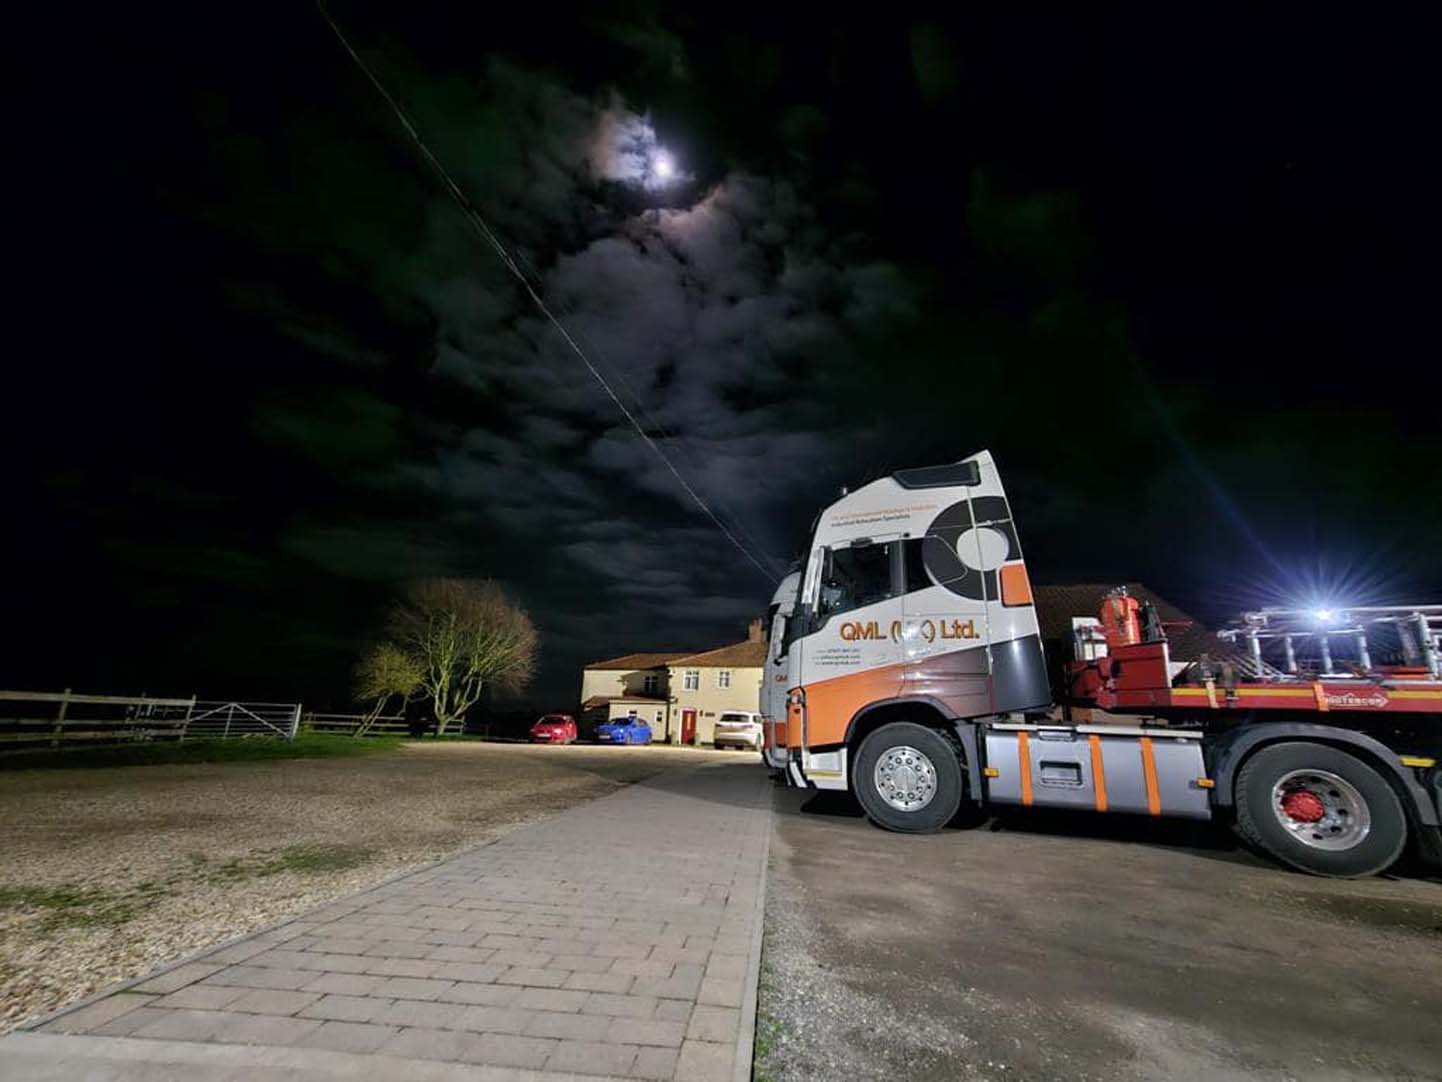 Parked up at night